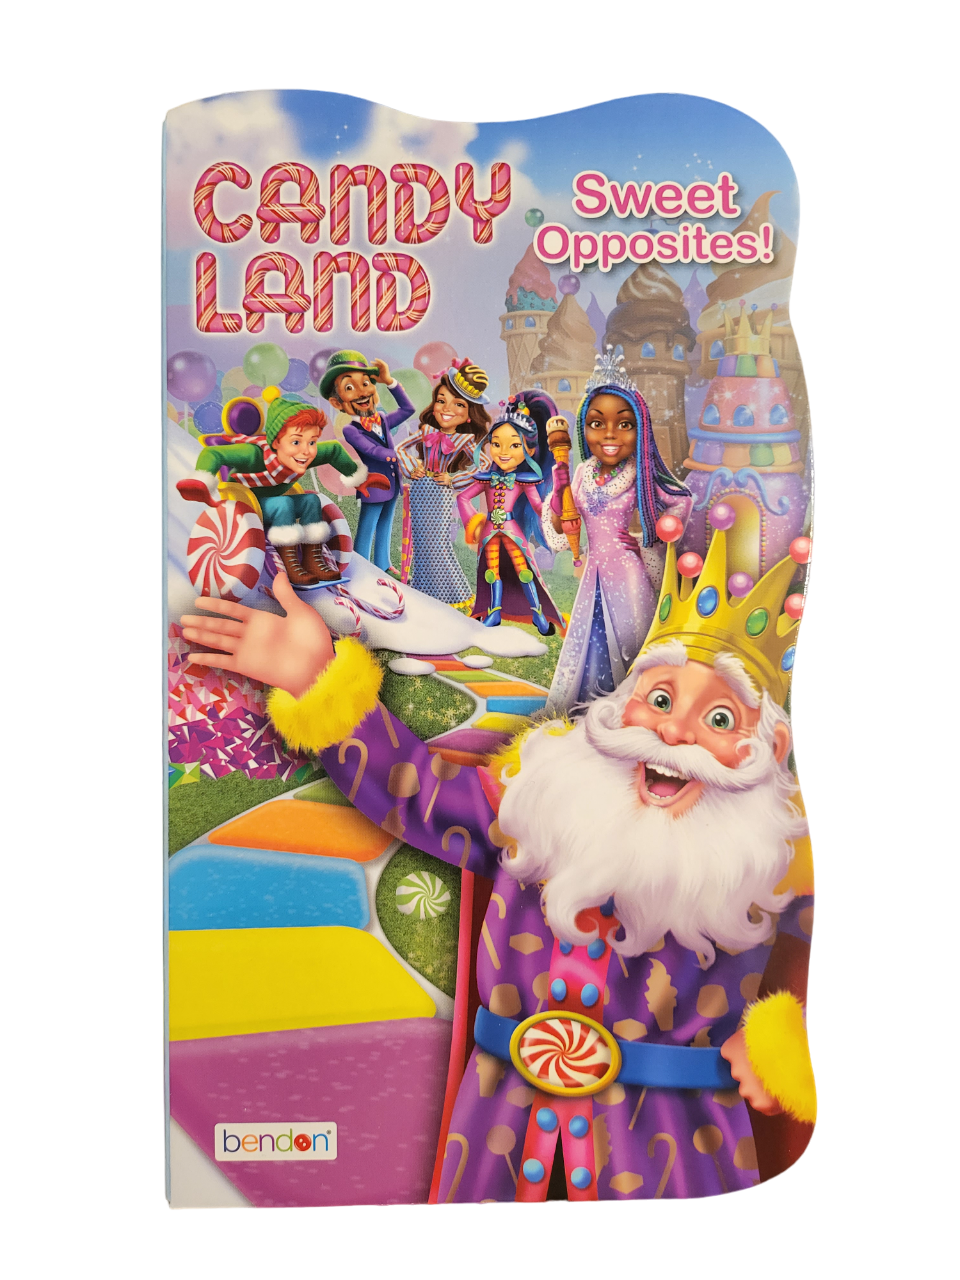 Bendon Hasbro Candy Land Board Book - New - Sweet Opposites!